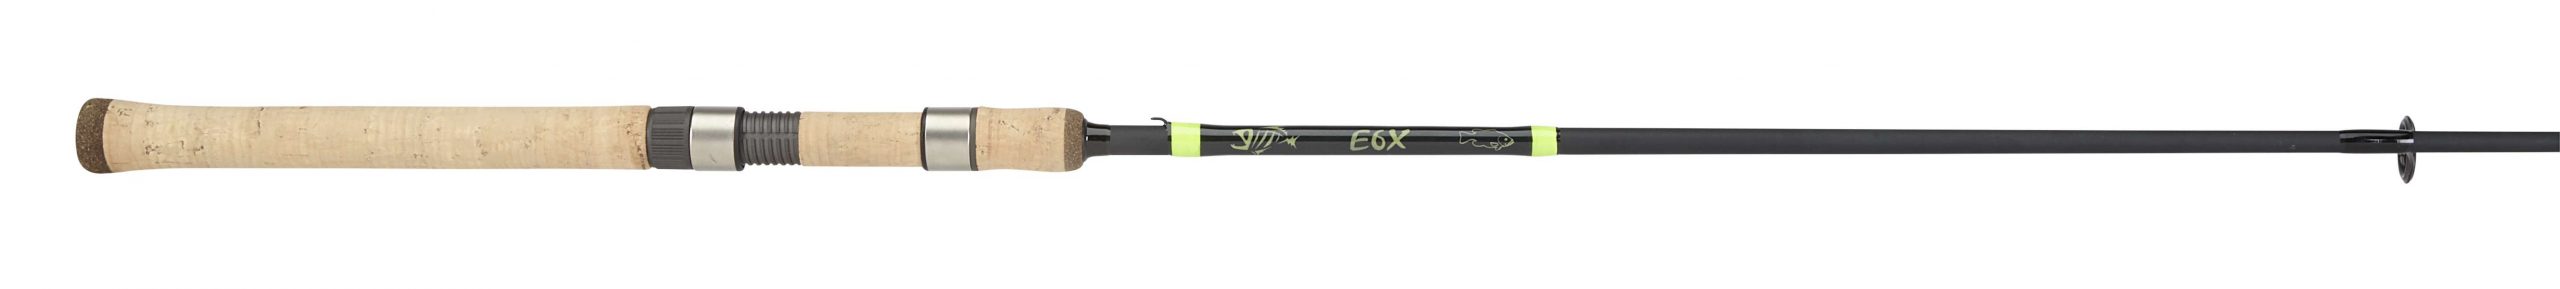 <b>G. Loomis</b><br>	E6X Bass Rods<br>			G. Loomis expands its launch of new E6X bass rods with two new two-piece spinning rods, ideal for those anglers who need the convenience of a multi-piece rod. Both with extra-fast action, the E6X 803-2S JWR is a medium-heavy power 6-foot, 8-inch rod for lures up to 5/8-ounce and line up to 14-pound test. The 7-foot, 1-inch E6X 852-2S JWR is a medium power rod for lighter line down to 6-pound test, and will throw 1/8-ounce lures.